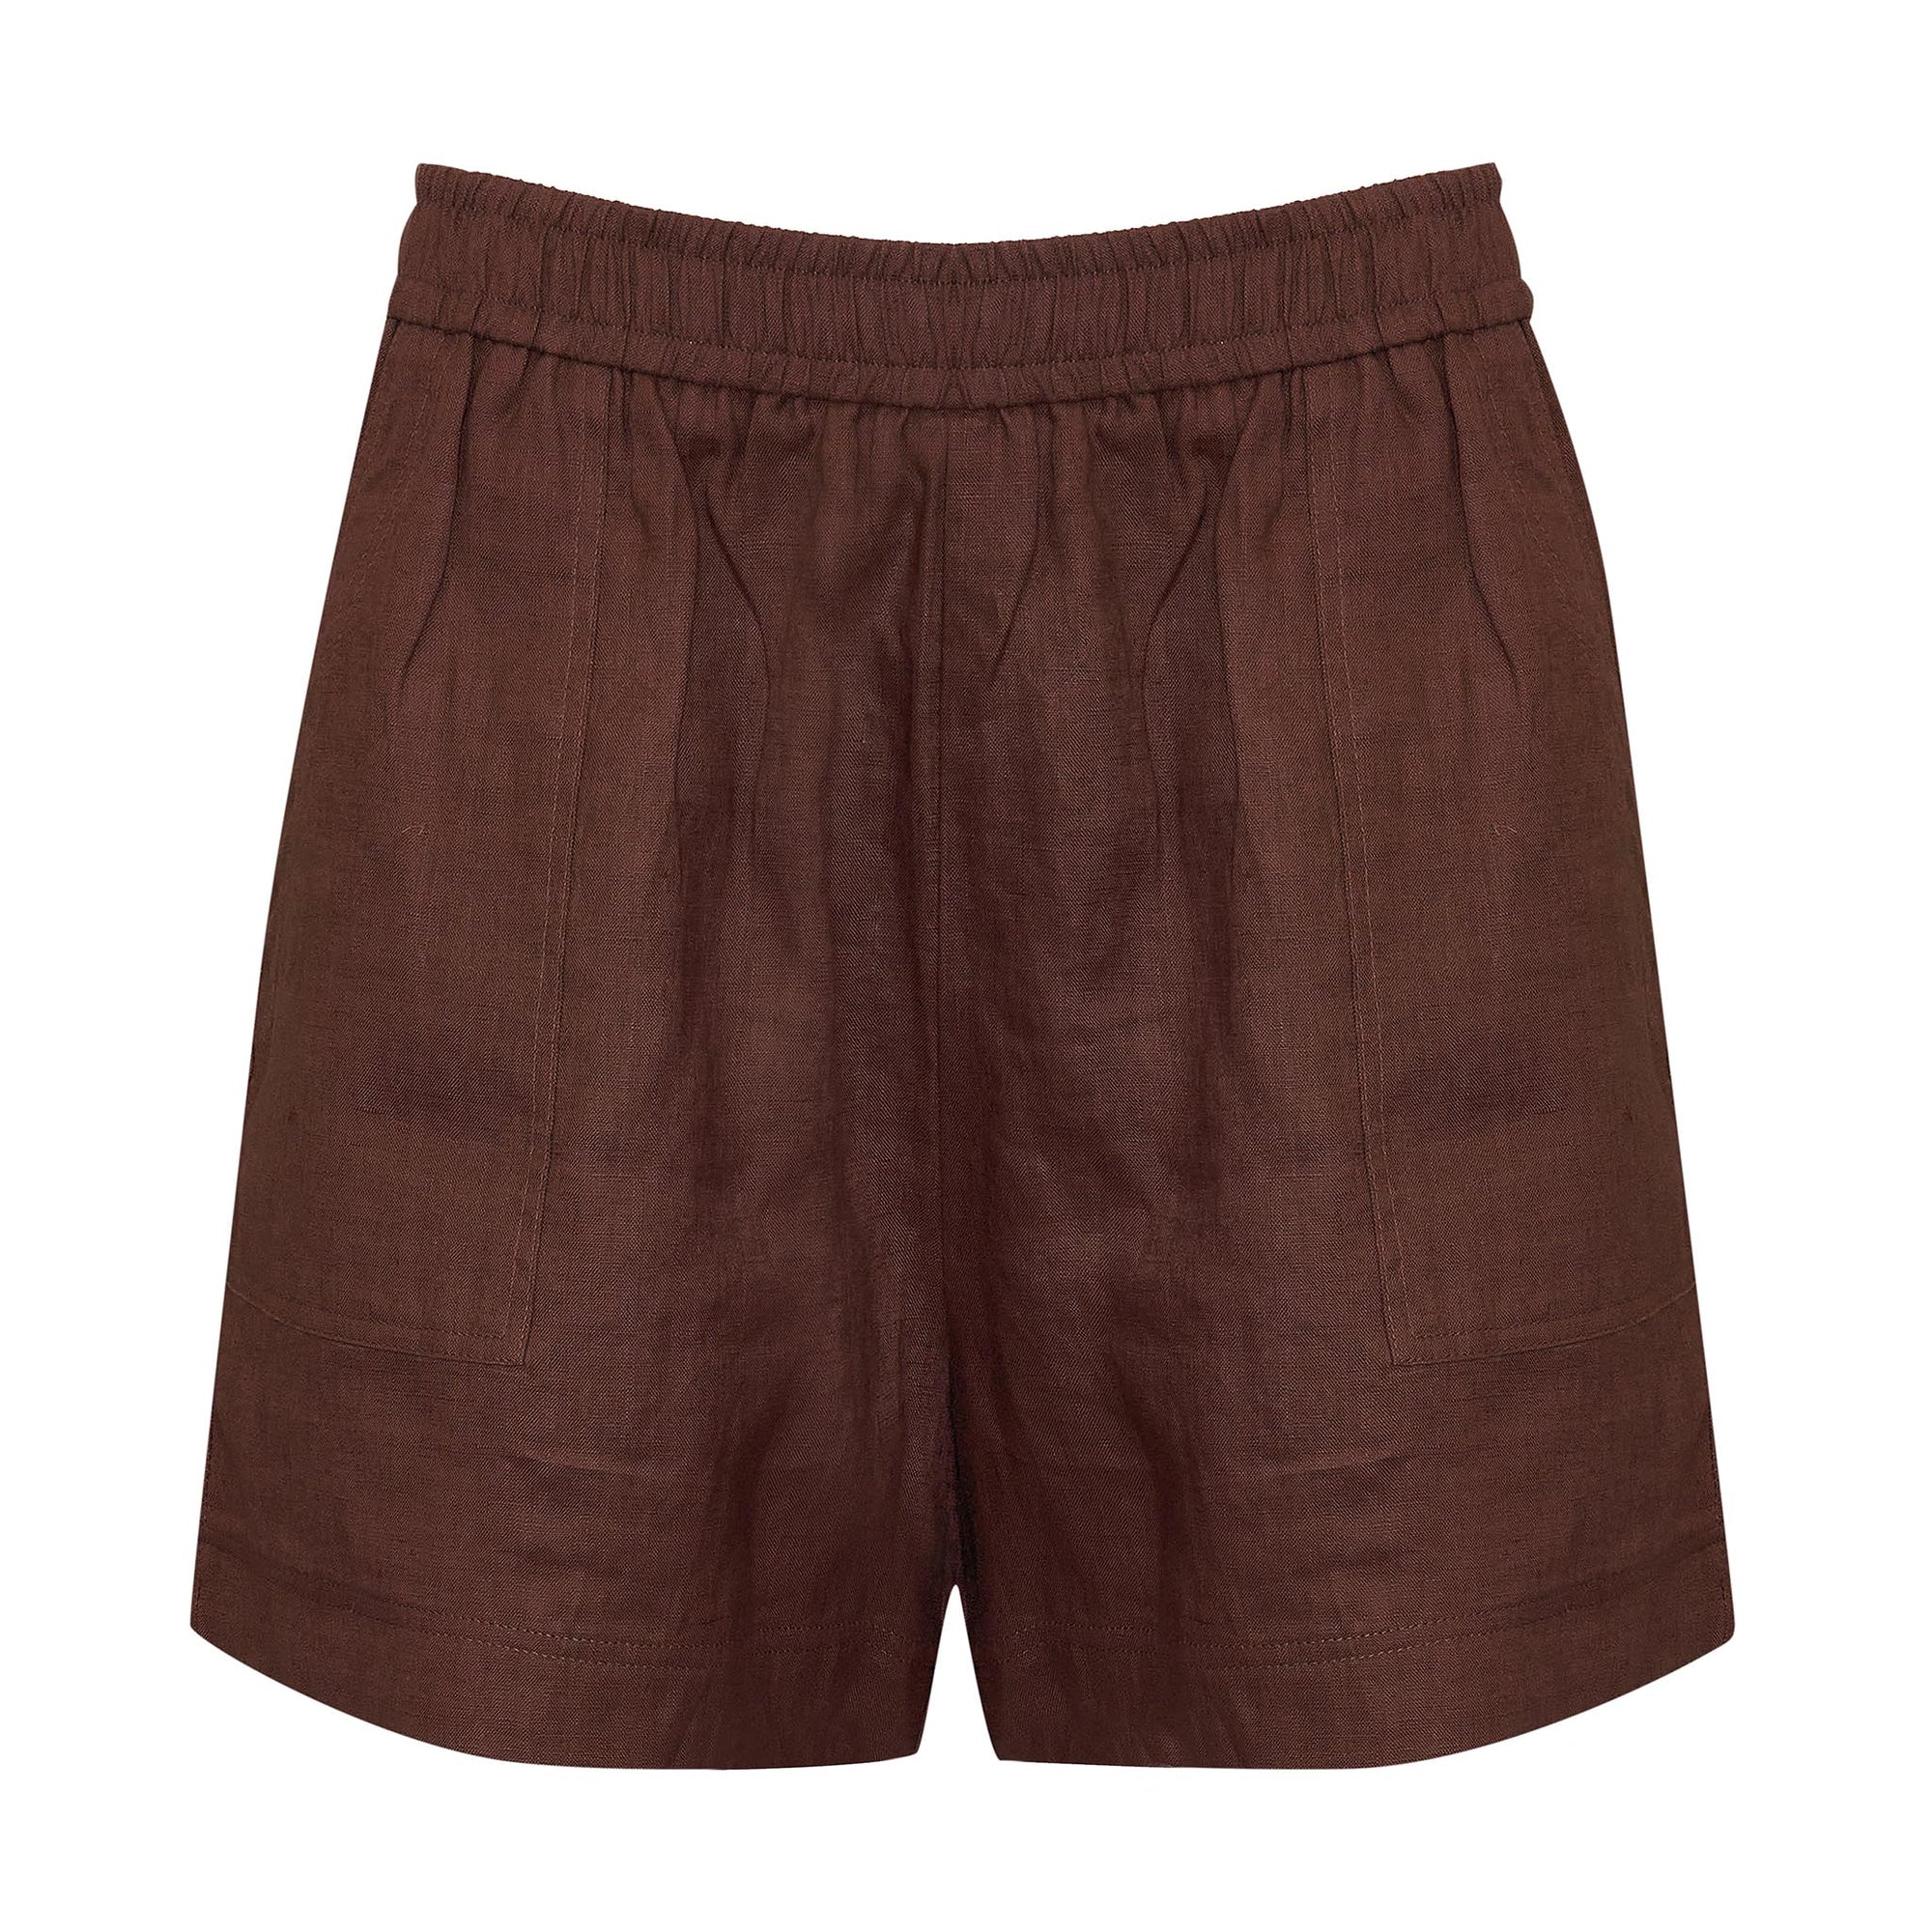 brown, shorts, elasticated waist, side pockets, product image